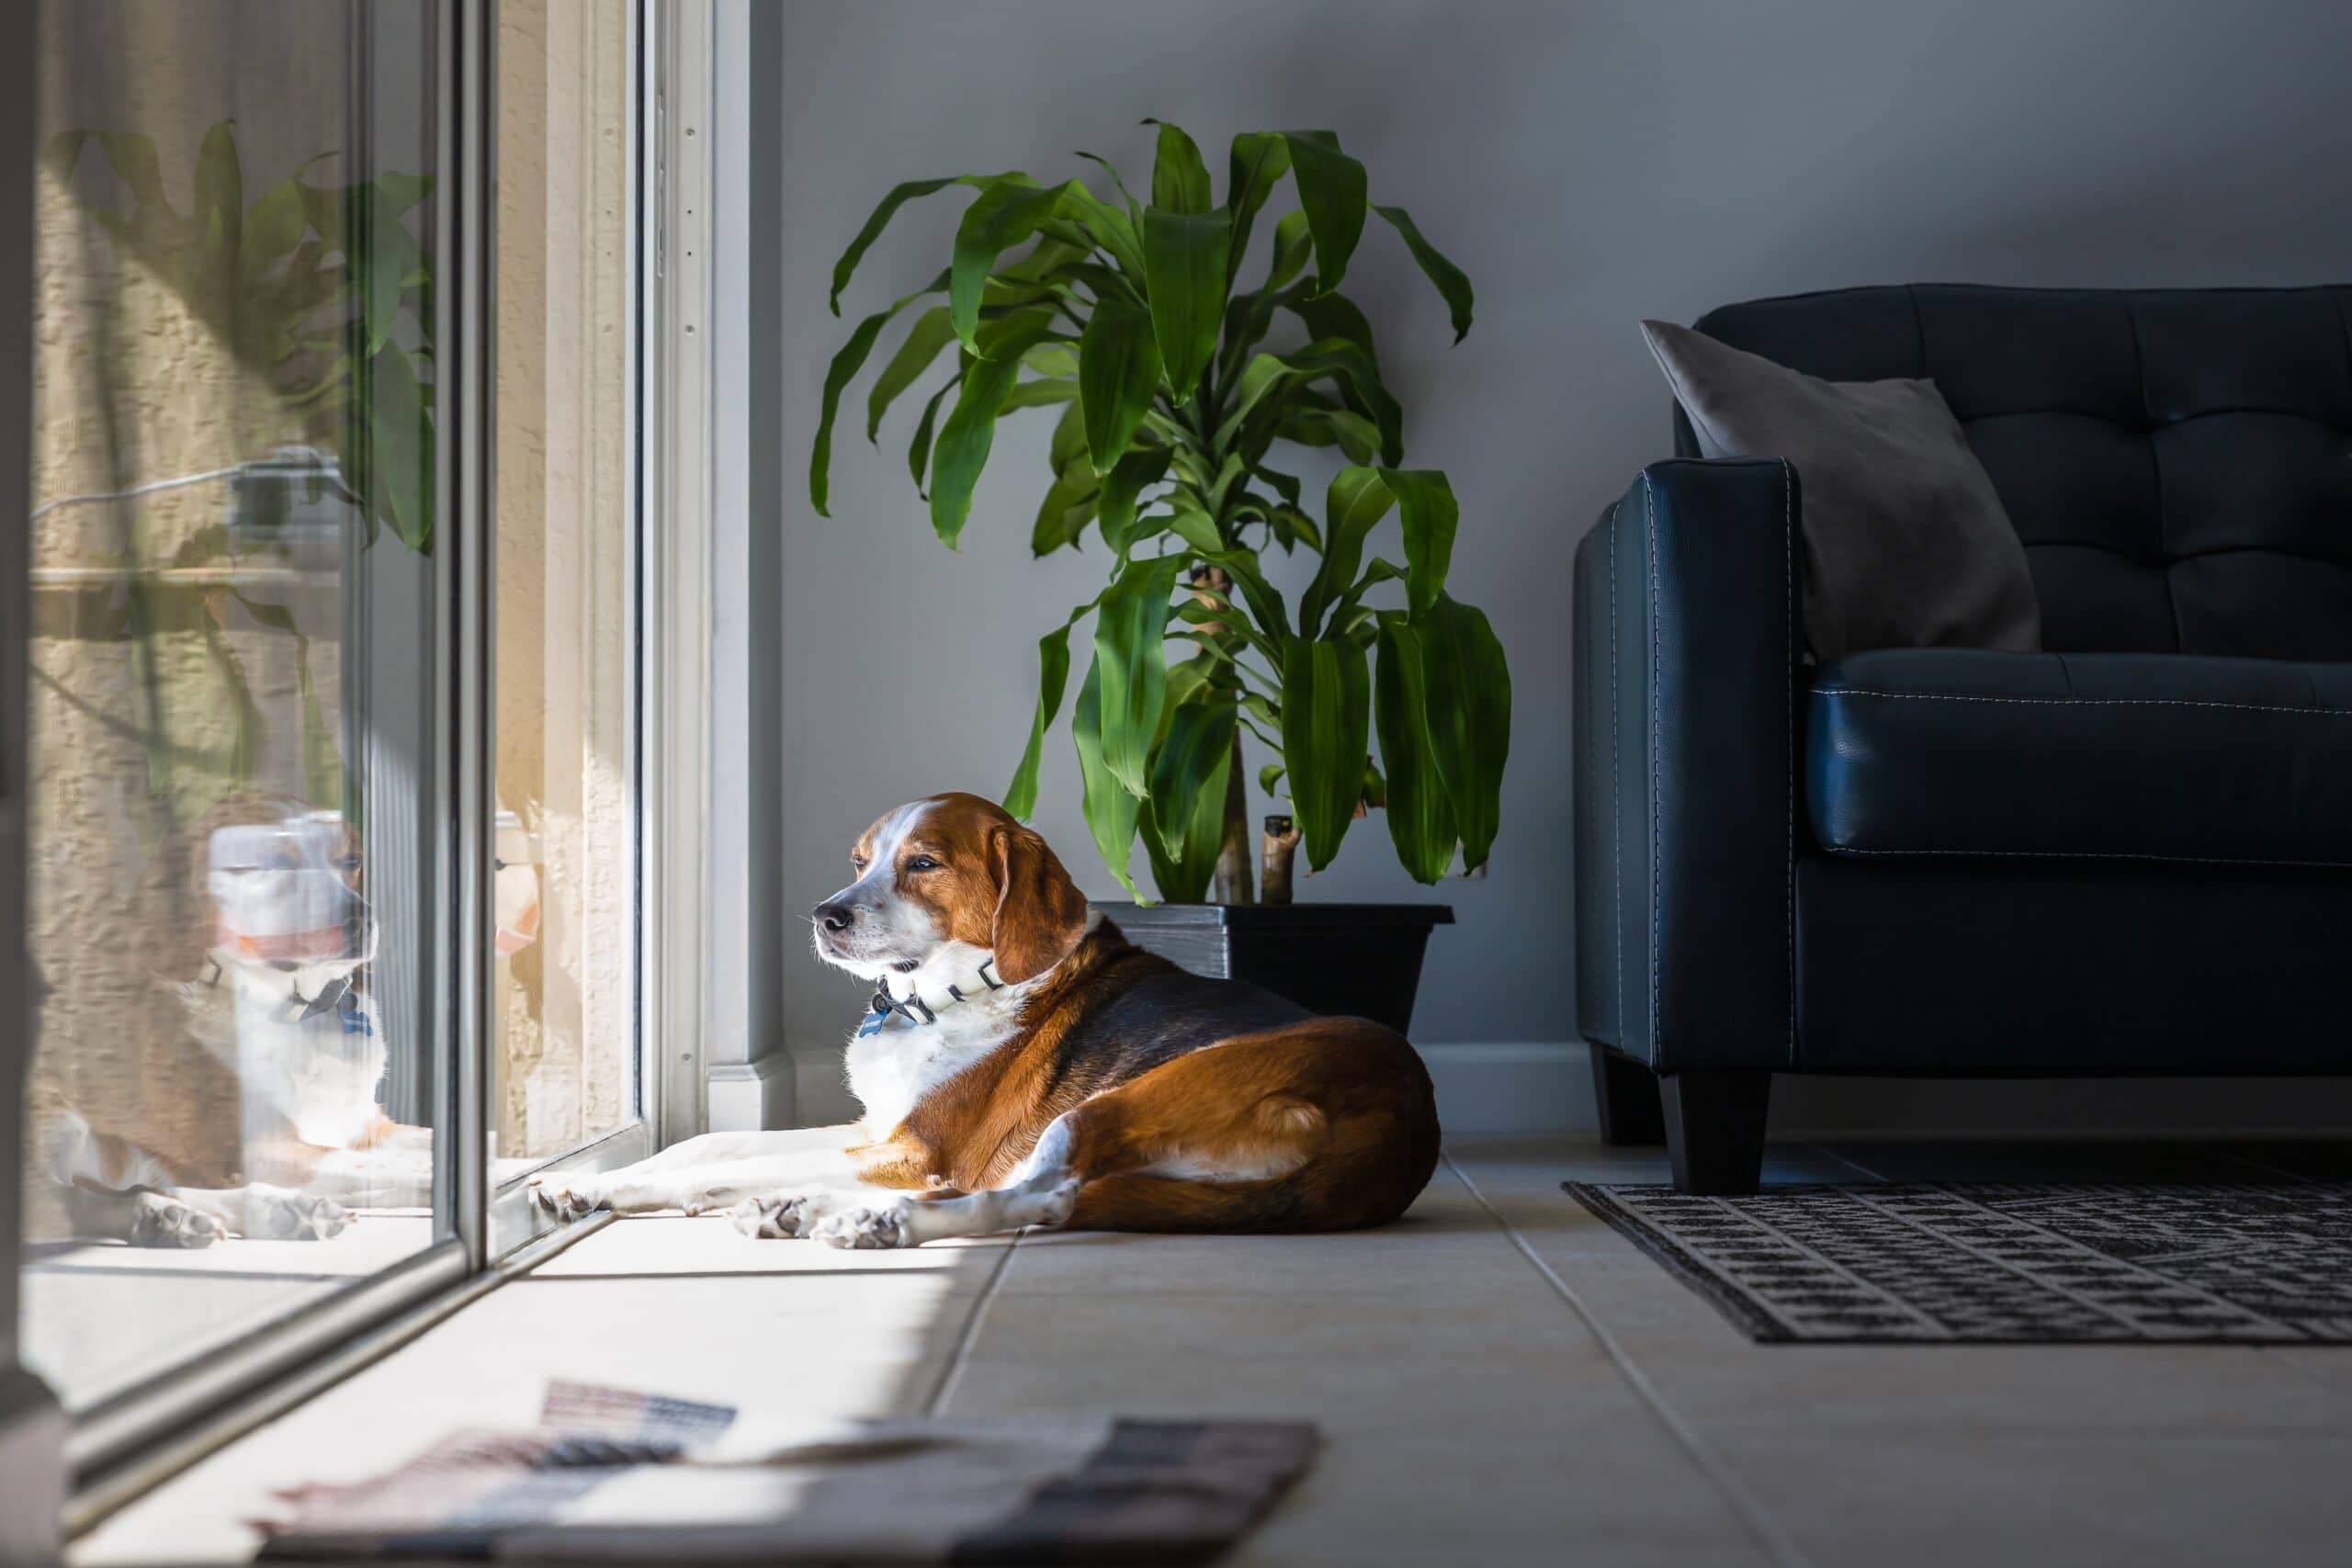 Beagle Hound mixed breed dog is relaxing and sunbathing by a large sliding glass doo